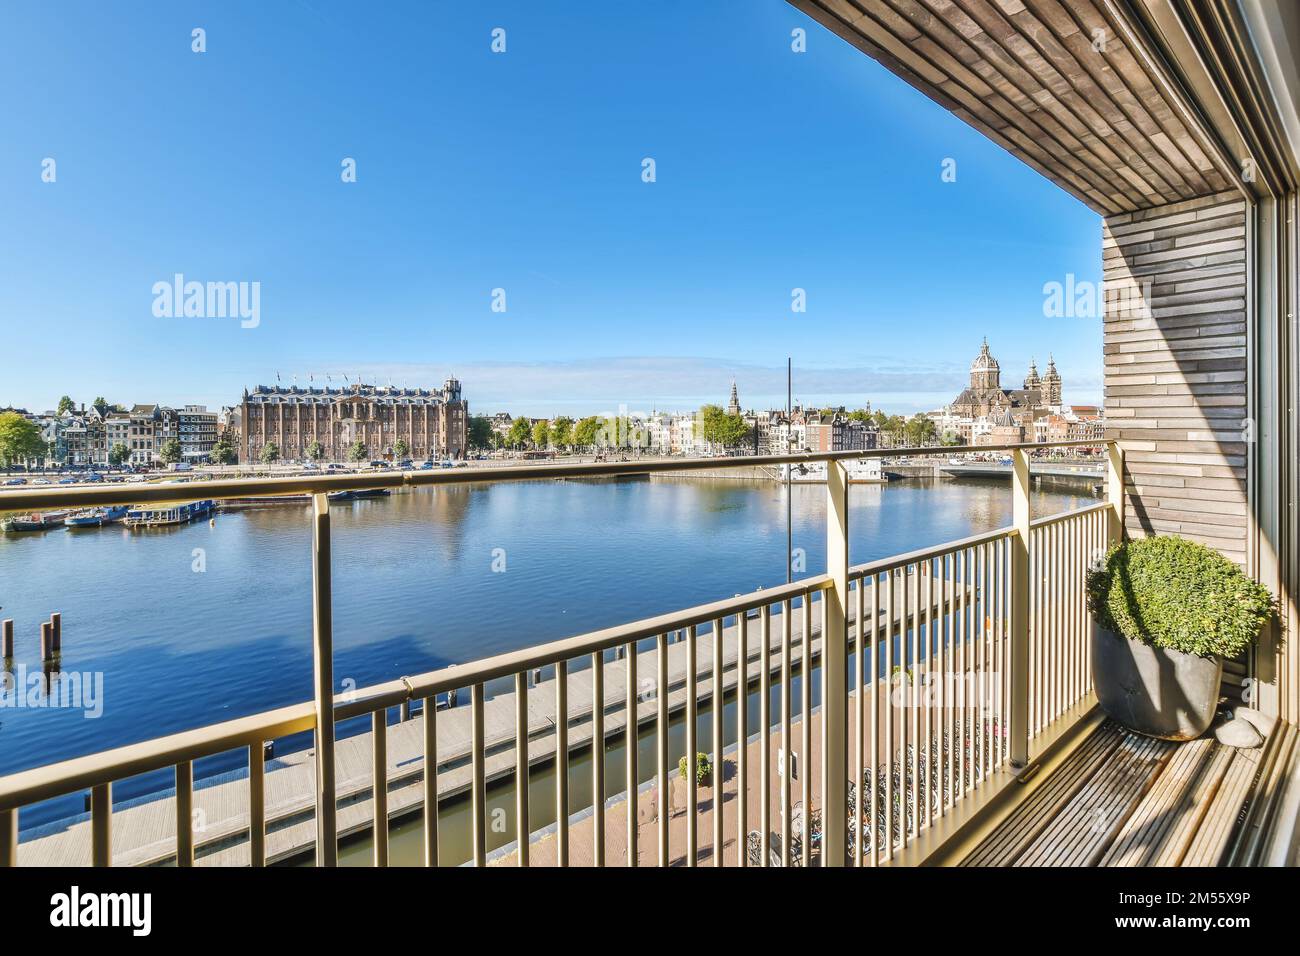 a balcony with a view of the water and buildings in the distance, taken from an apartment window looking out onto the canal Stock Photo